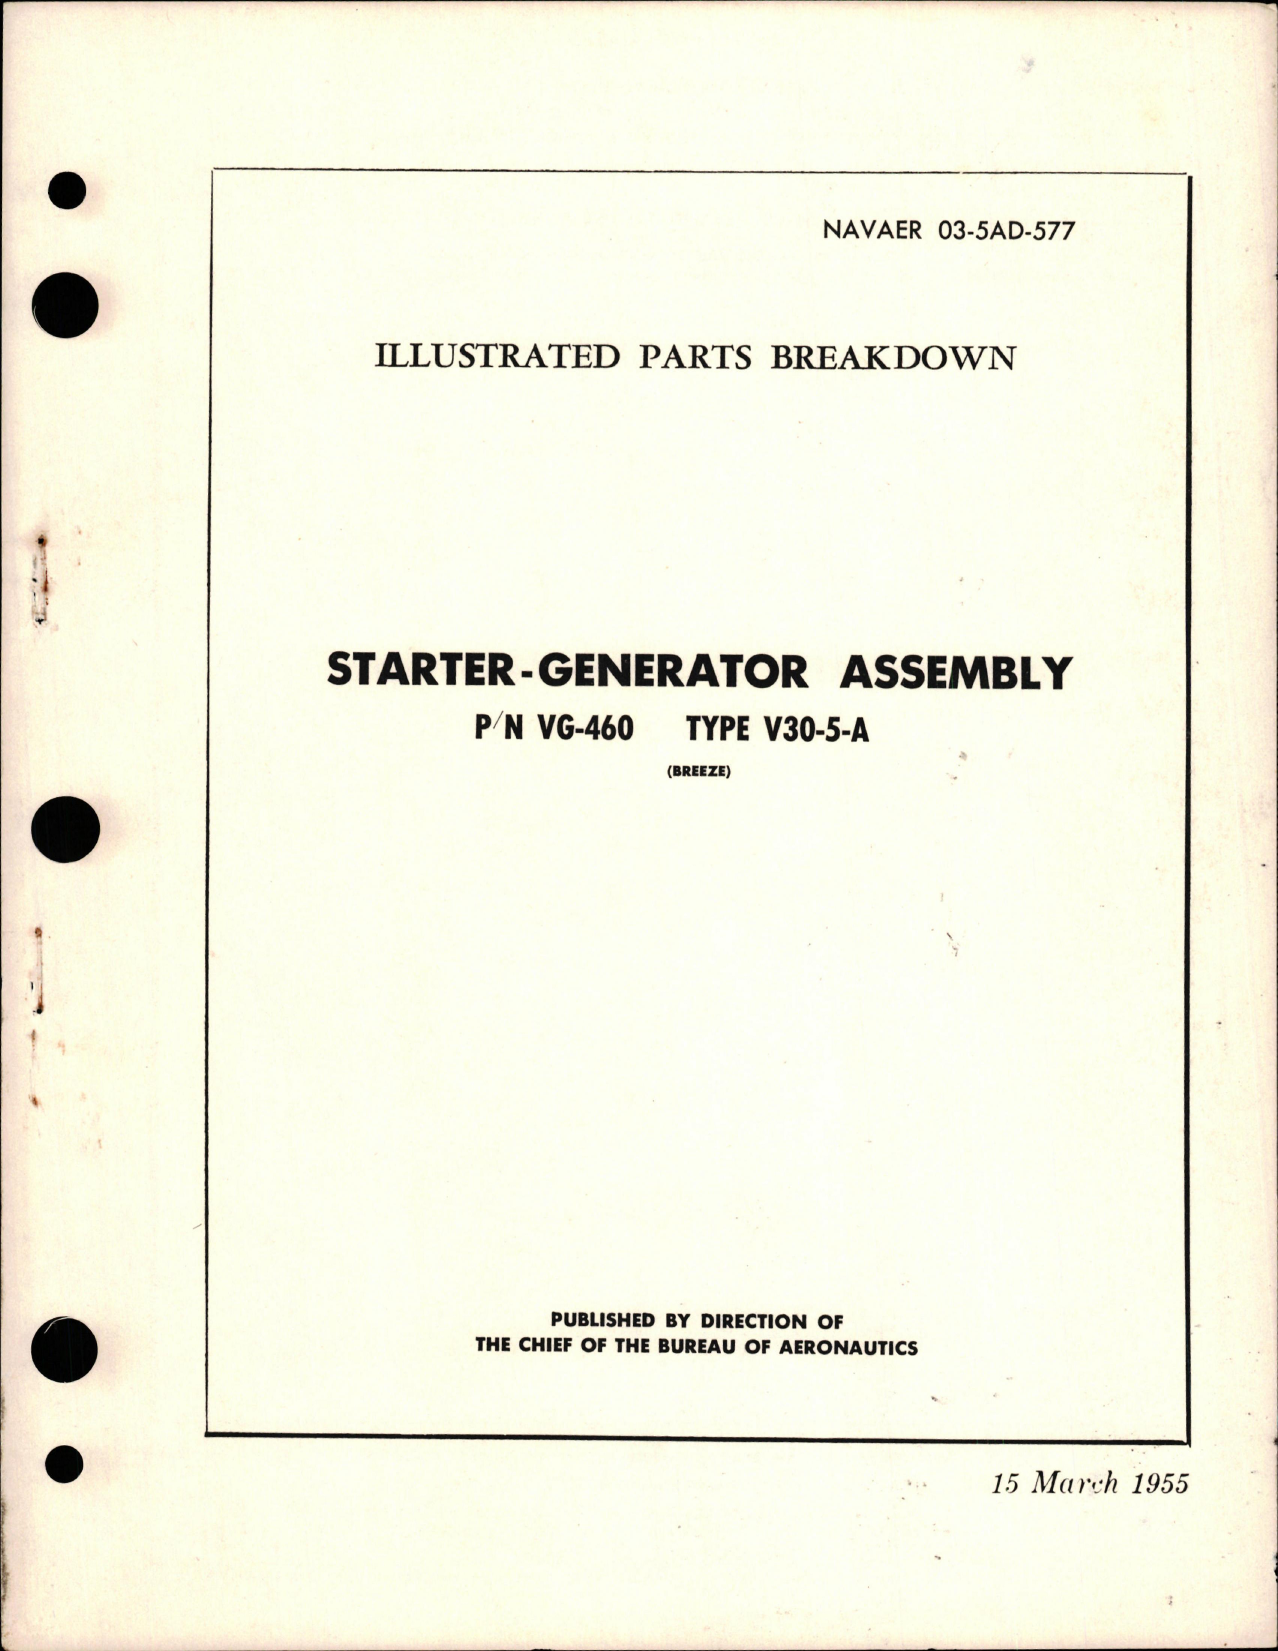 Sample page 1 from AirCorps Library document: Illustrated Parts Breakdown for Starter Generator Assembly - Part VG-460 - Type V30-5-A